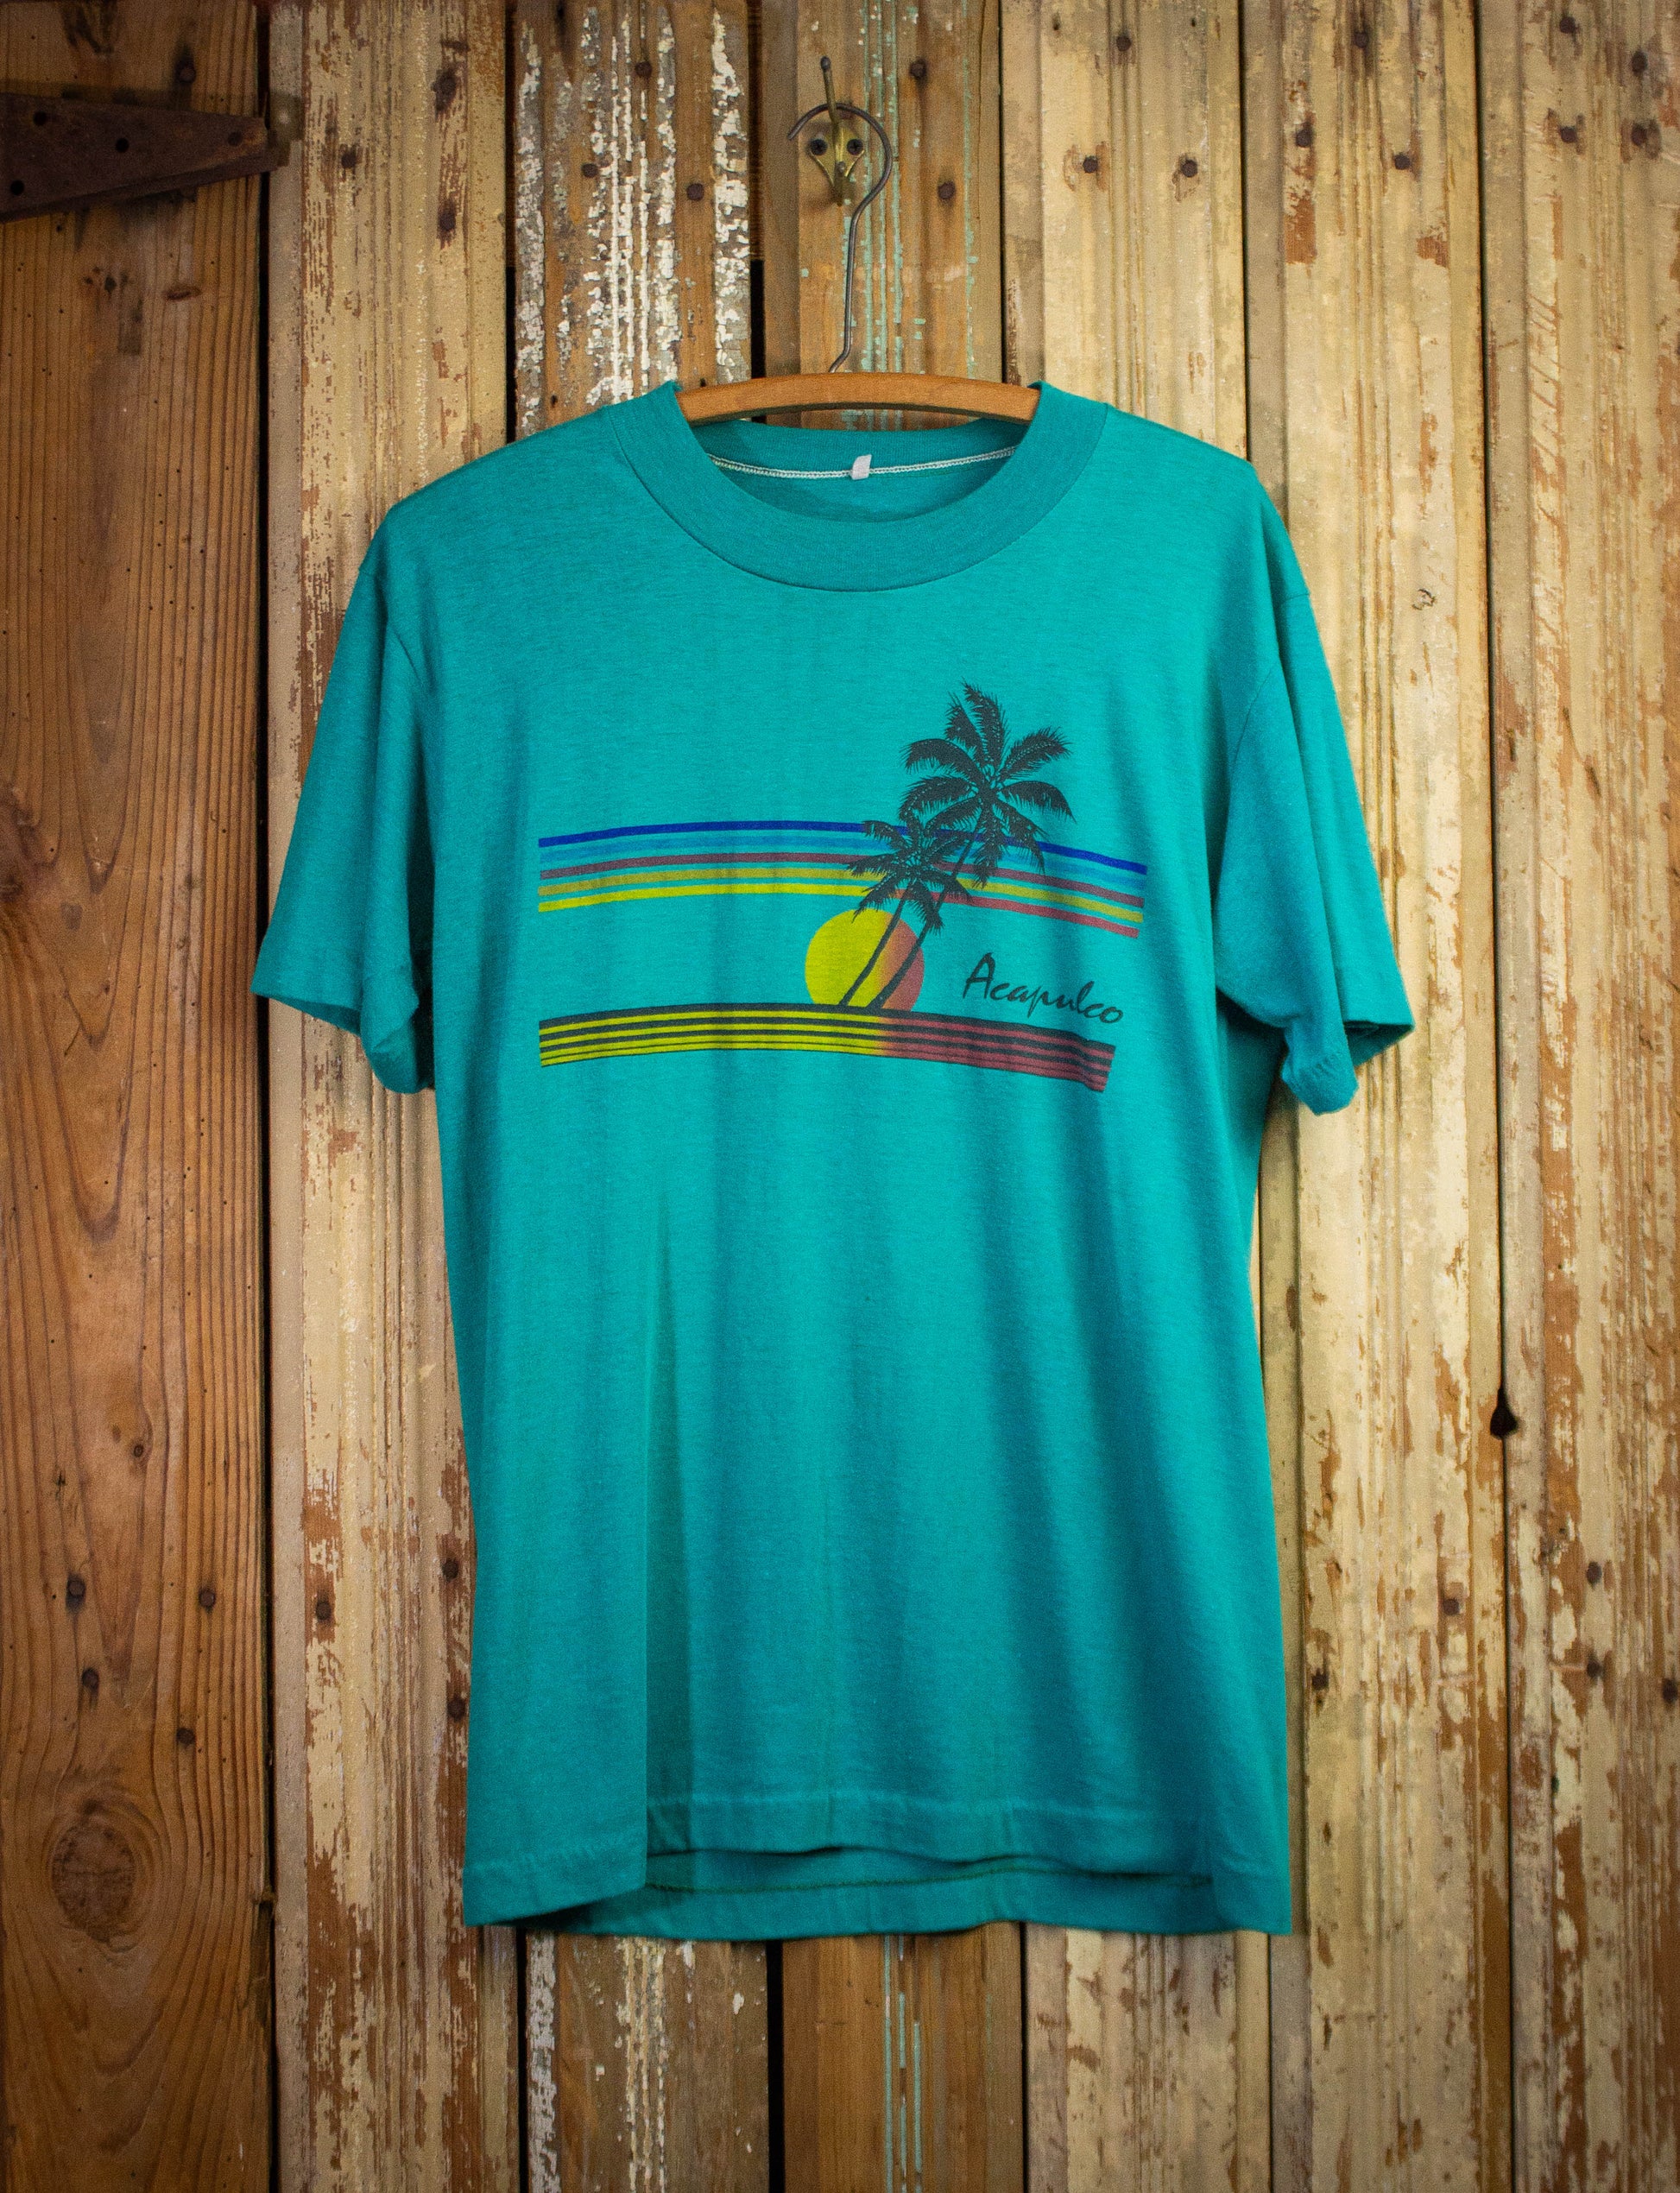 Vintage Acapulco Graphic T Shirt 80s Teal Large